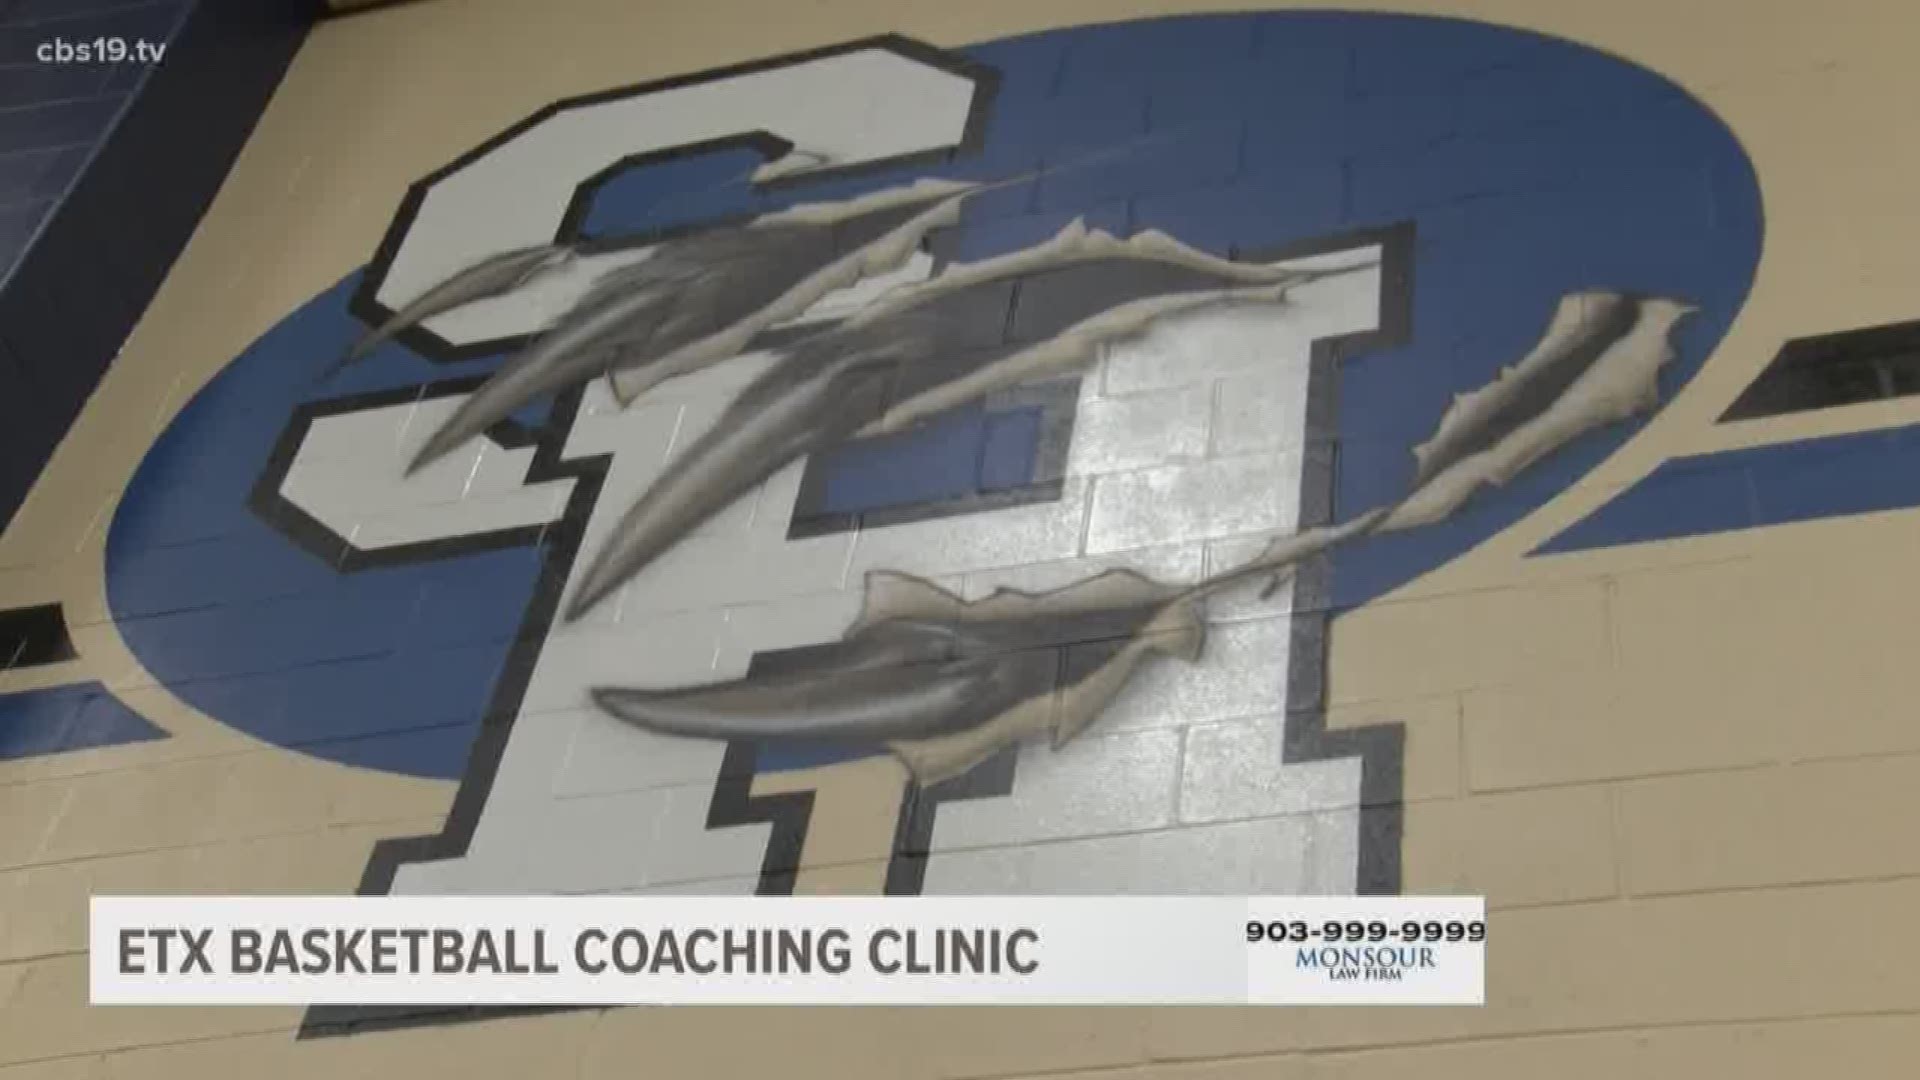 While East Texas high school football is in full swing, coaches are gearing up for the hardwood.